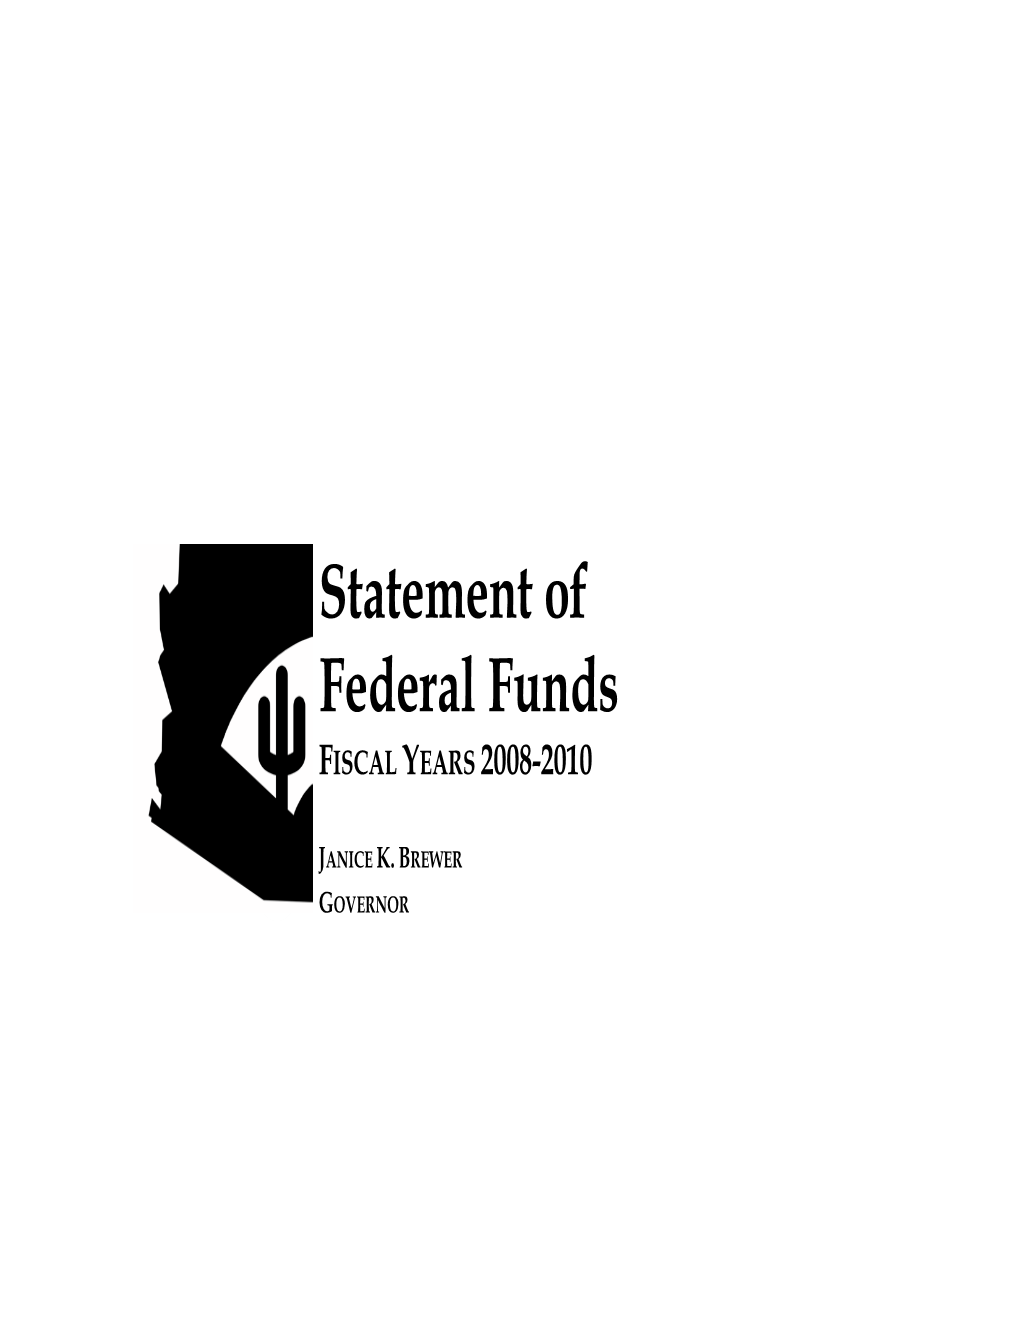 Statement of Federal Funds 2008